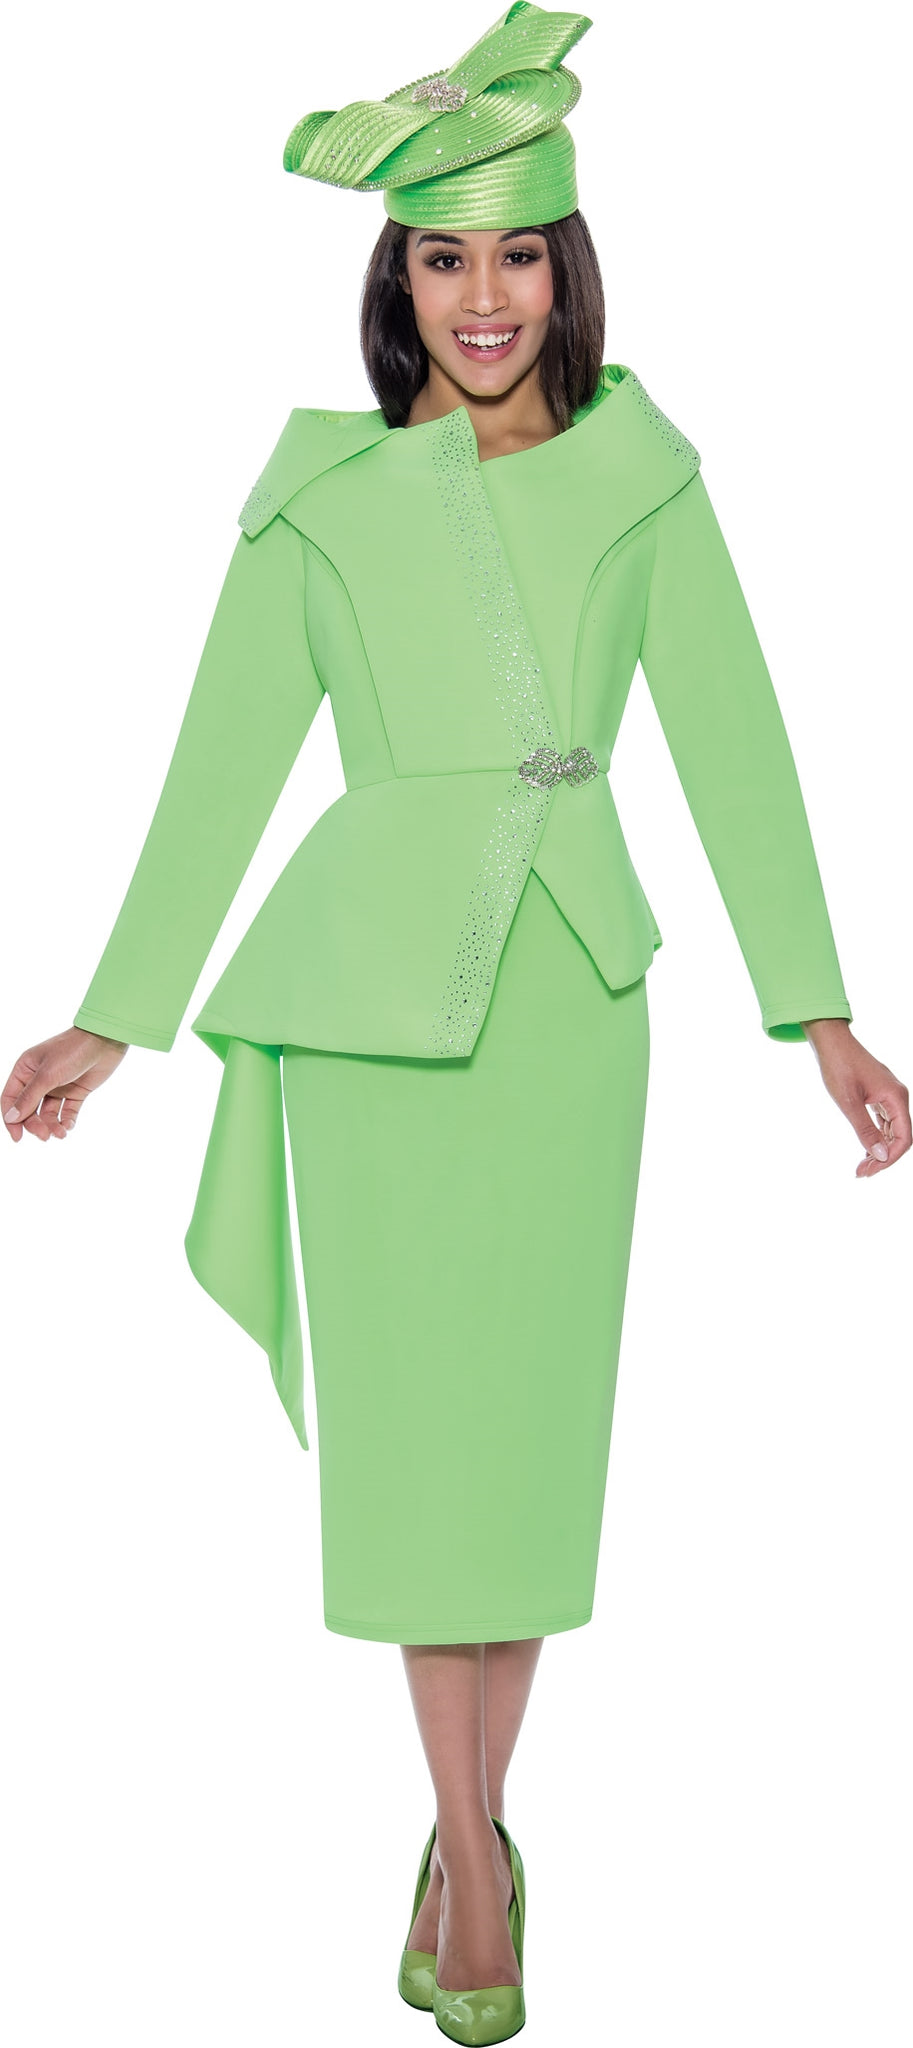 GMI Church Suit 9652-Lime - Church Suits For Less